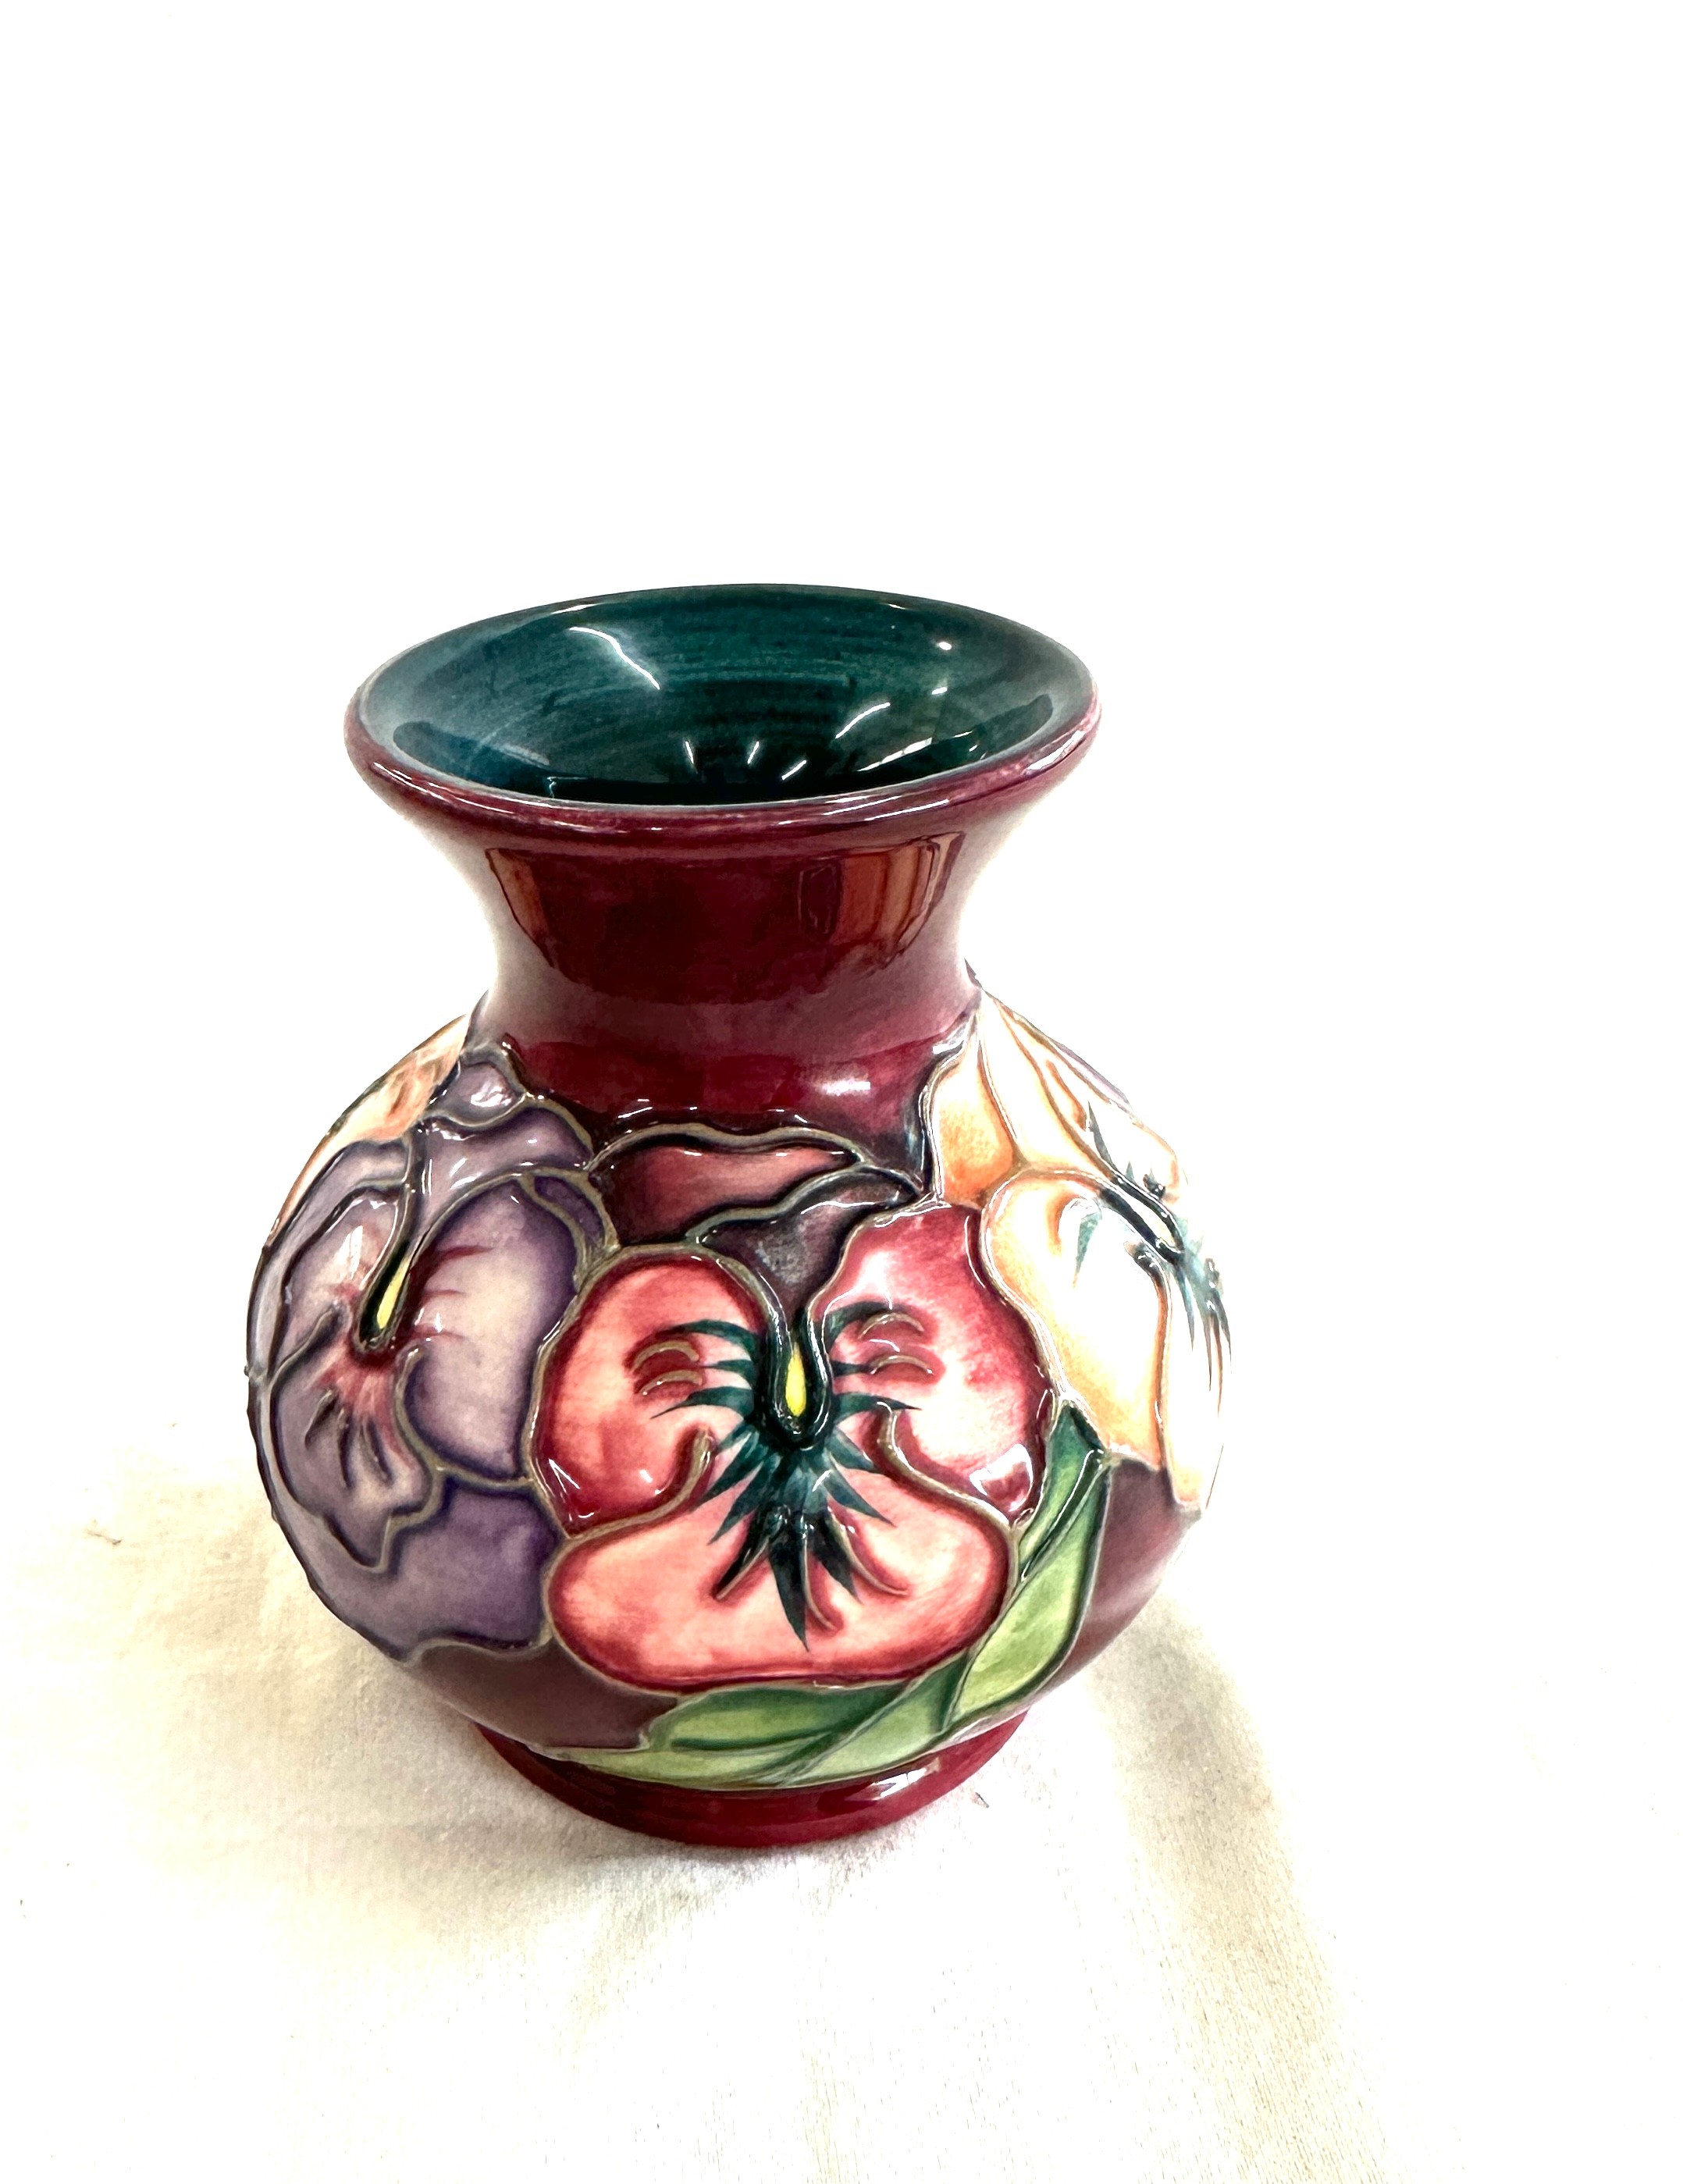 1993 Moorcroft potter vase 3.5 inches tall - Image 4 of 5